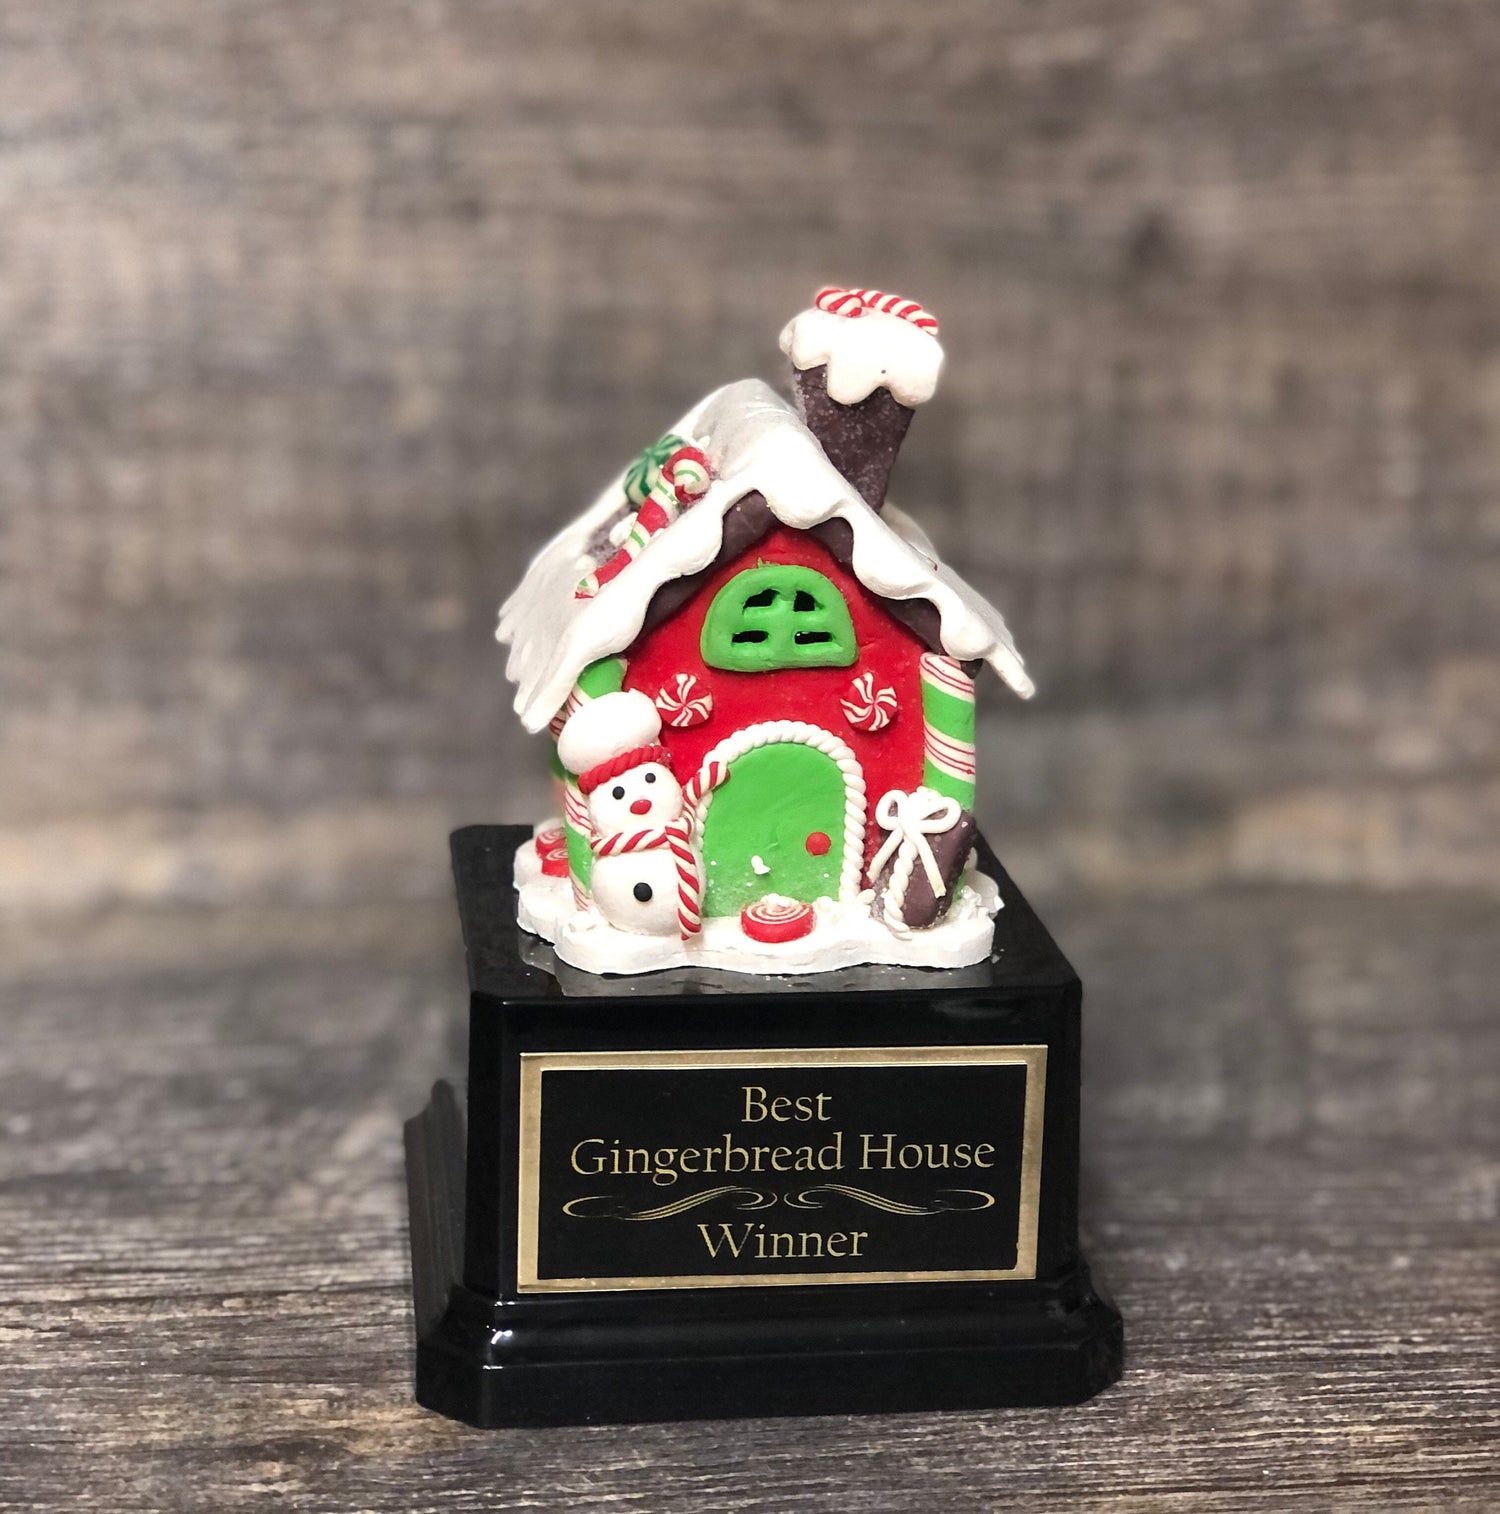 Gingerbread House Cookie Bake Off Trophy Ugly Sweater Trophy Contest Award Winner Christmas Cookie Decorating Holiday Party Snowman Decor